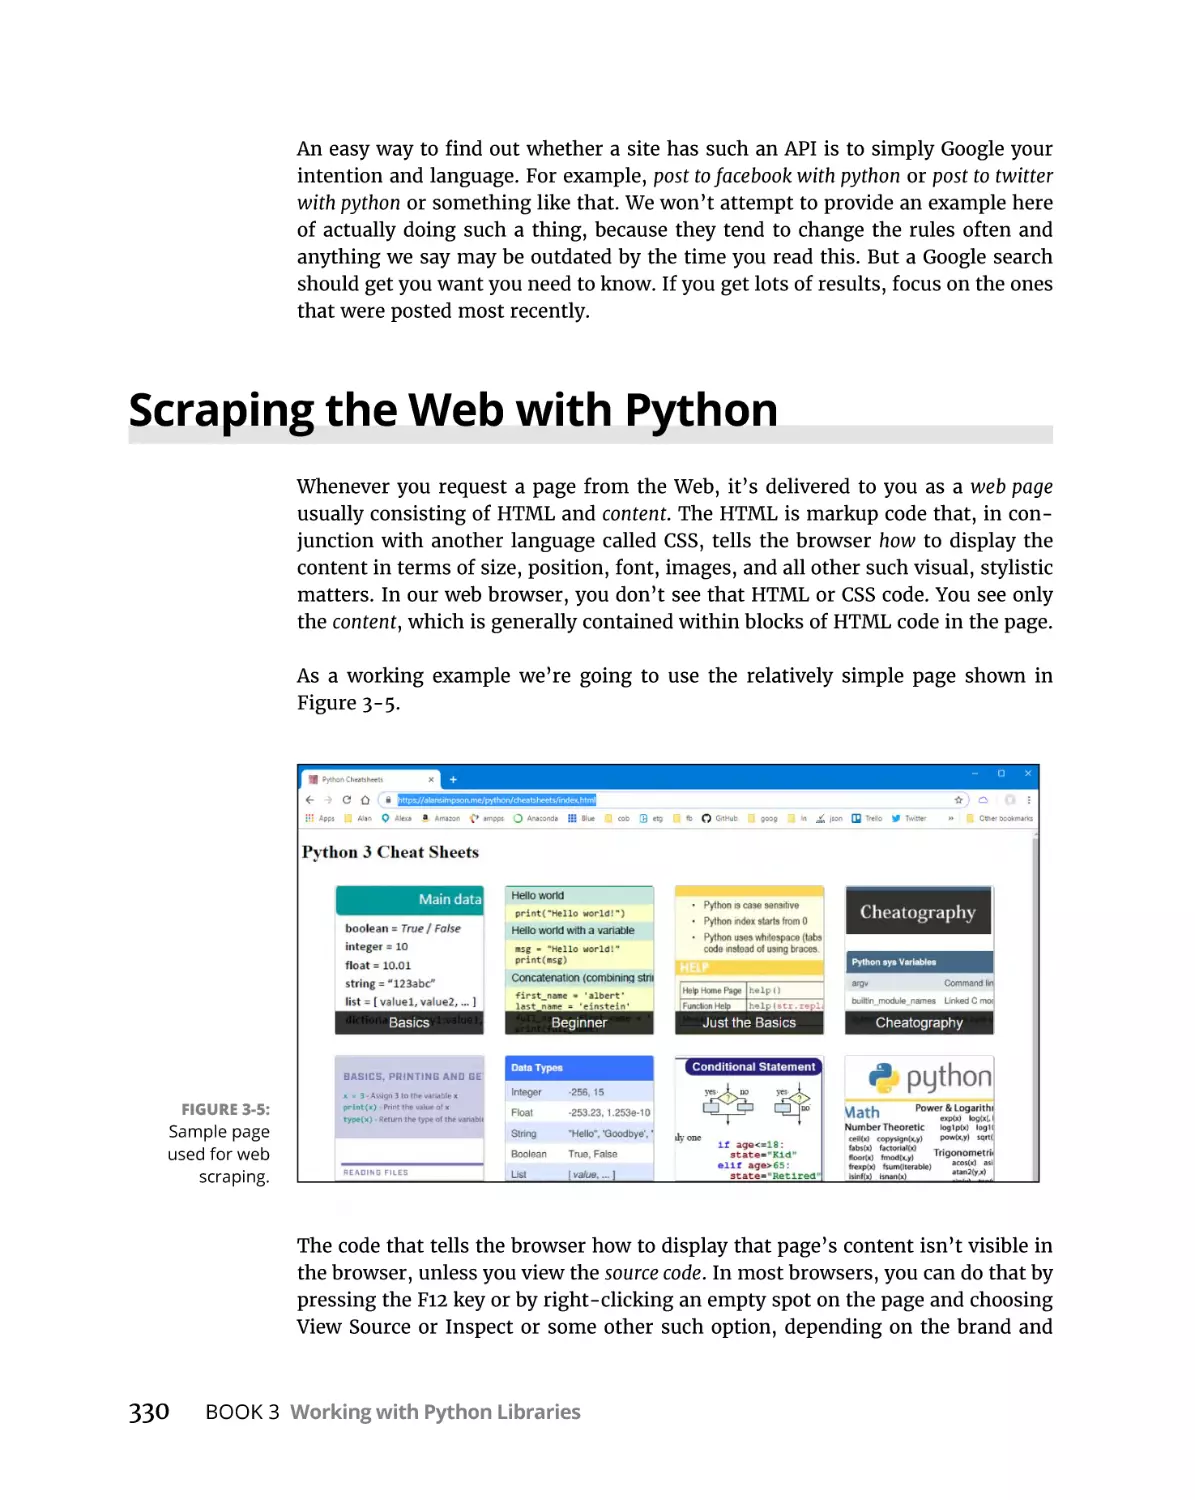 Scraping the Web with Python